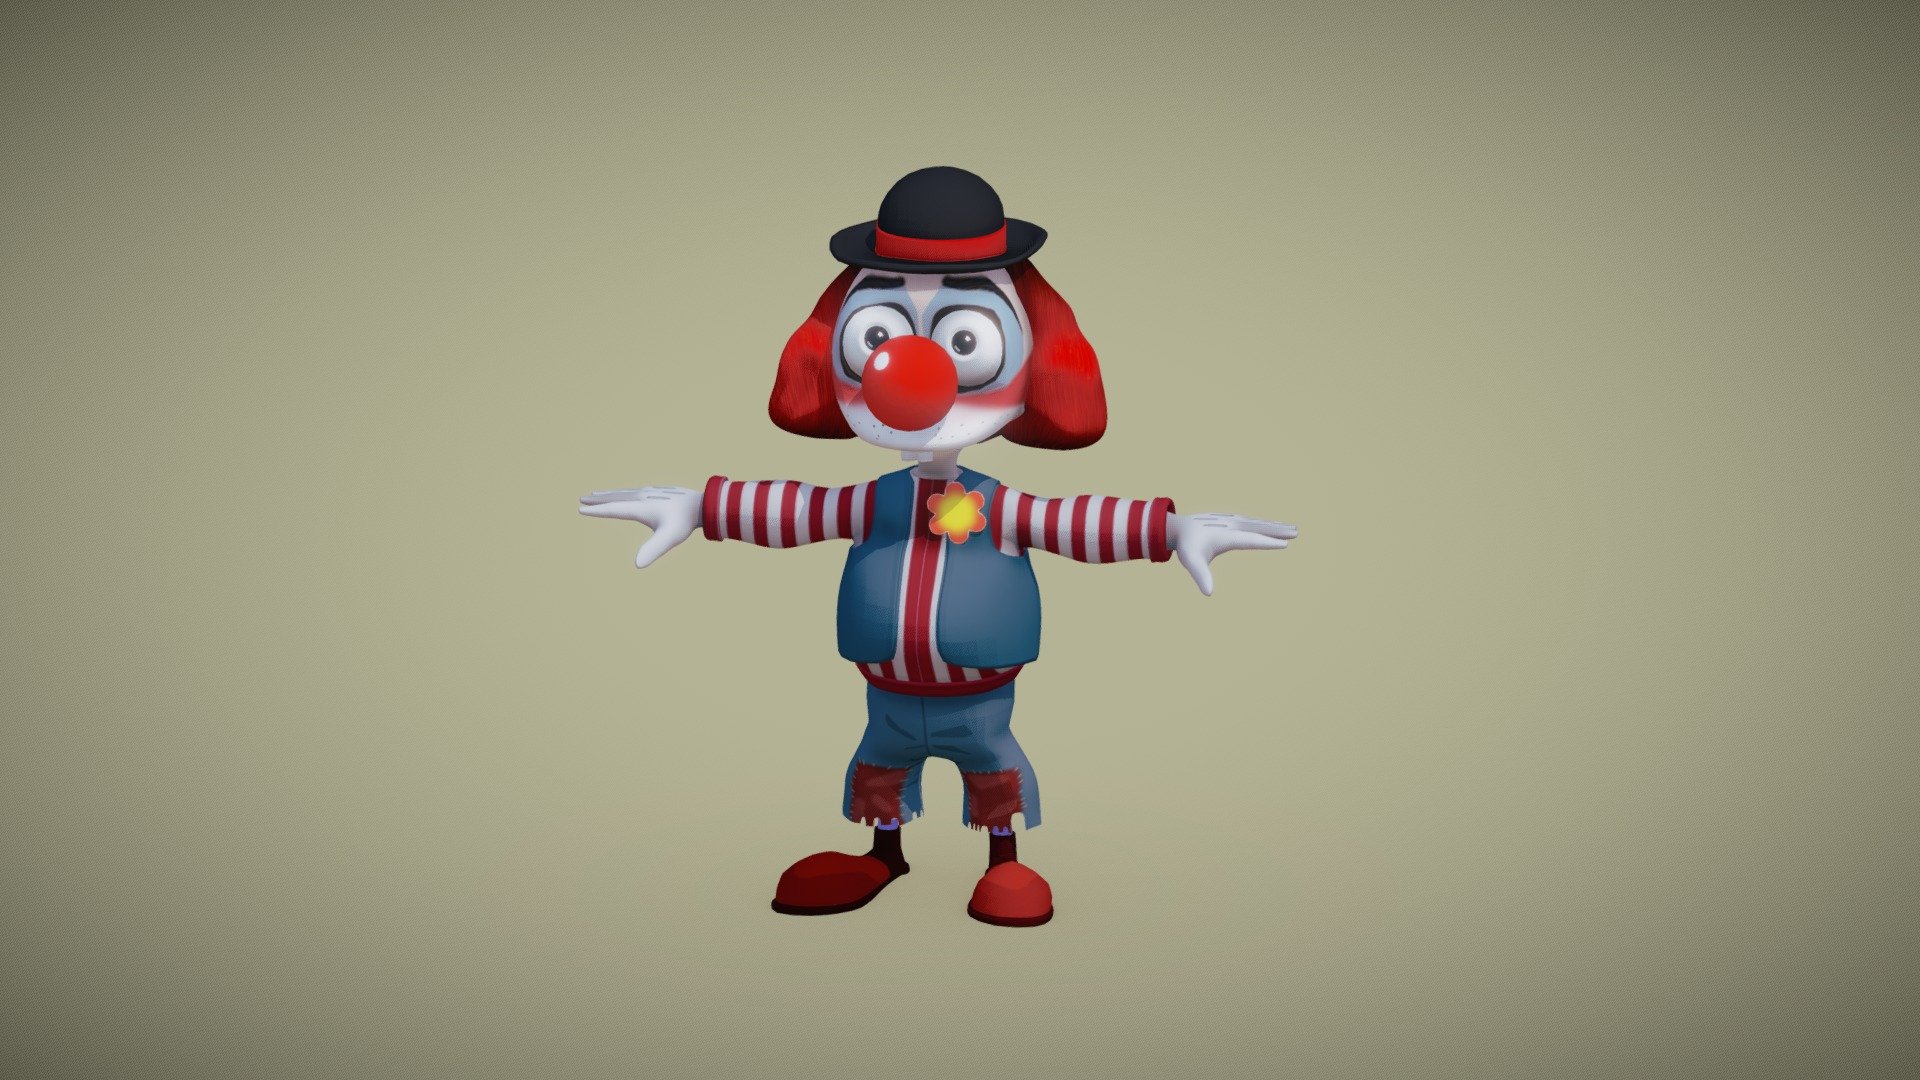 A clown character modeled by 3dsmax with fine typology ready for rig.
This Clown is in  high quality, photo real model that will enhance detail and realism to any of your rendering projects. The model has a fully textured, detailed design 3d model